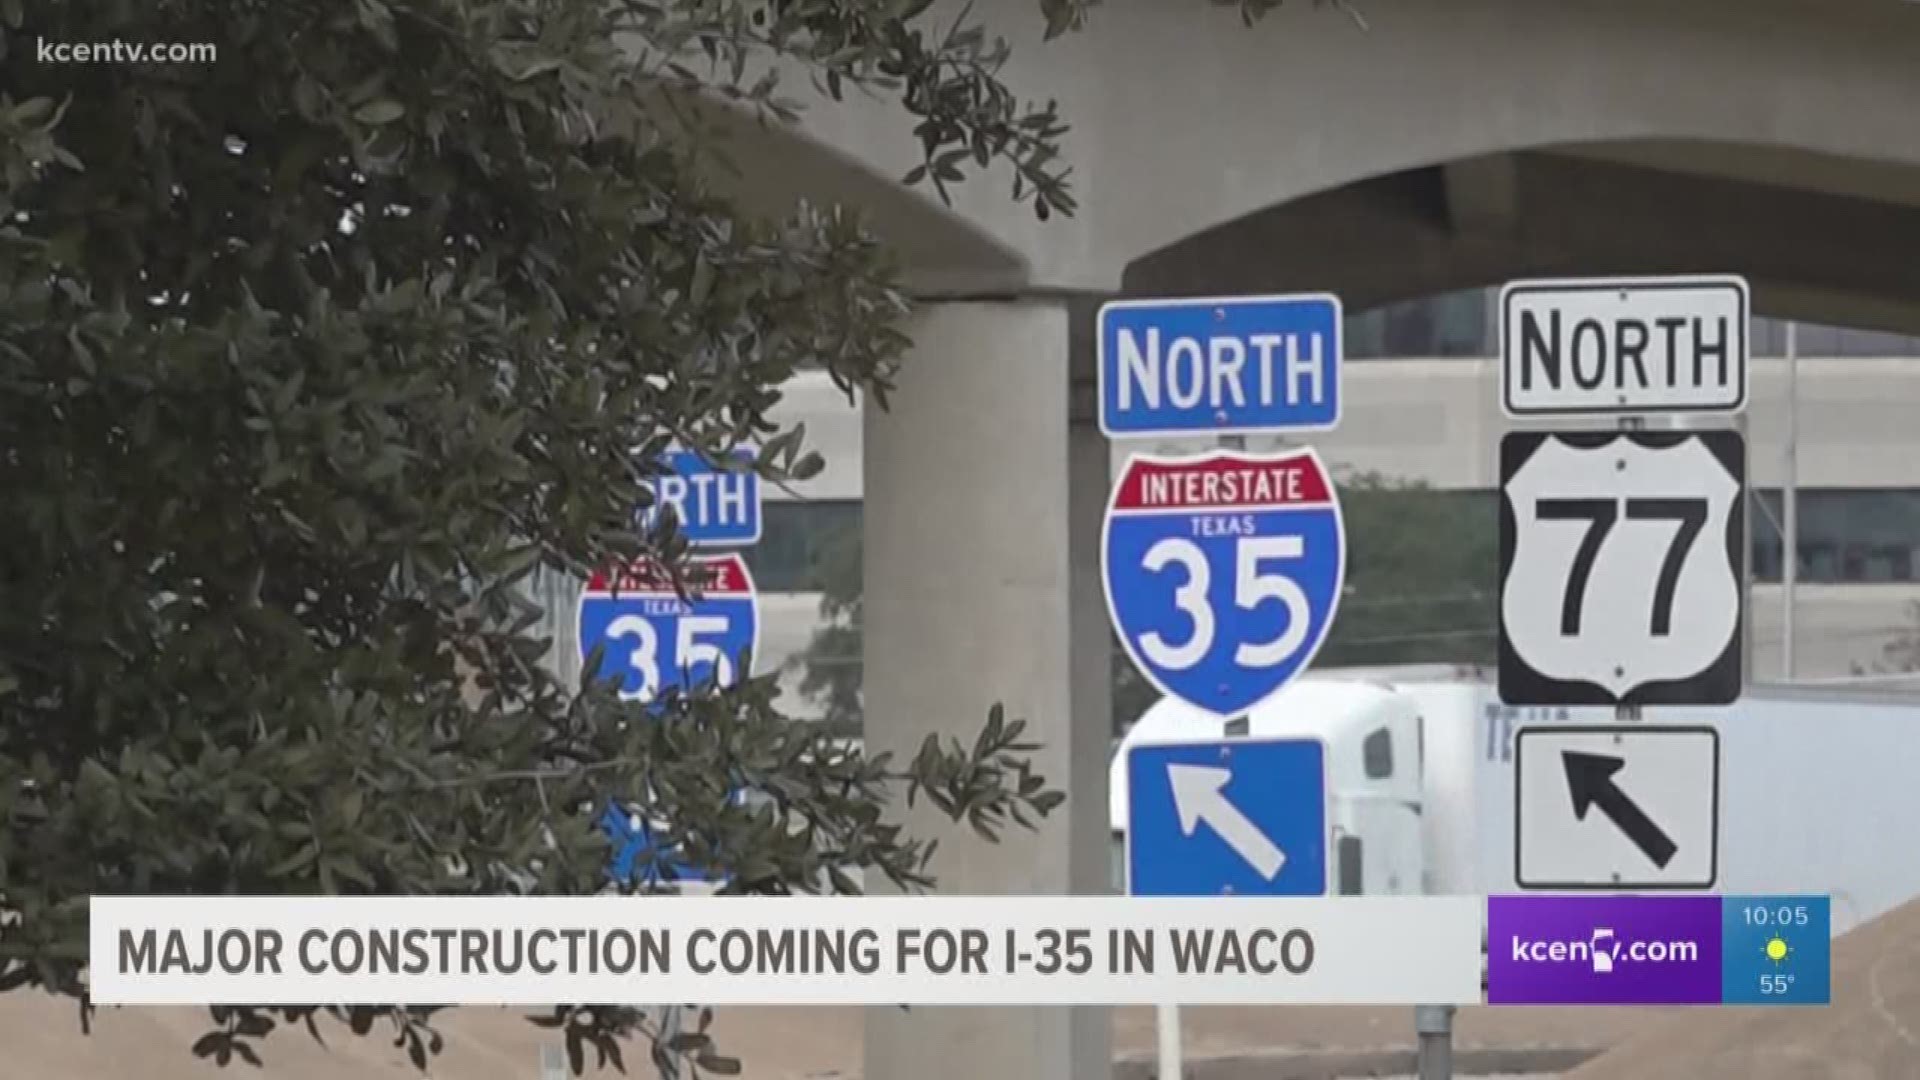 TxDOT said it established a steering committee with the city, Baylor University and major businesses, to improve communication about construction with the public.